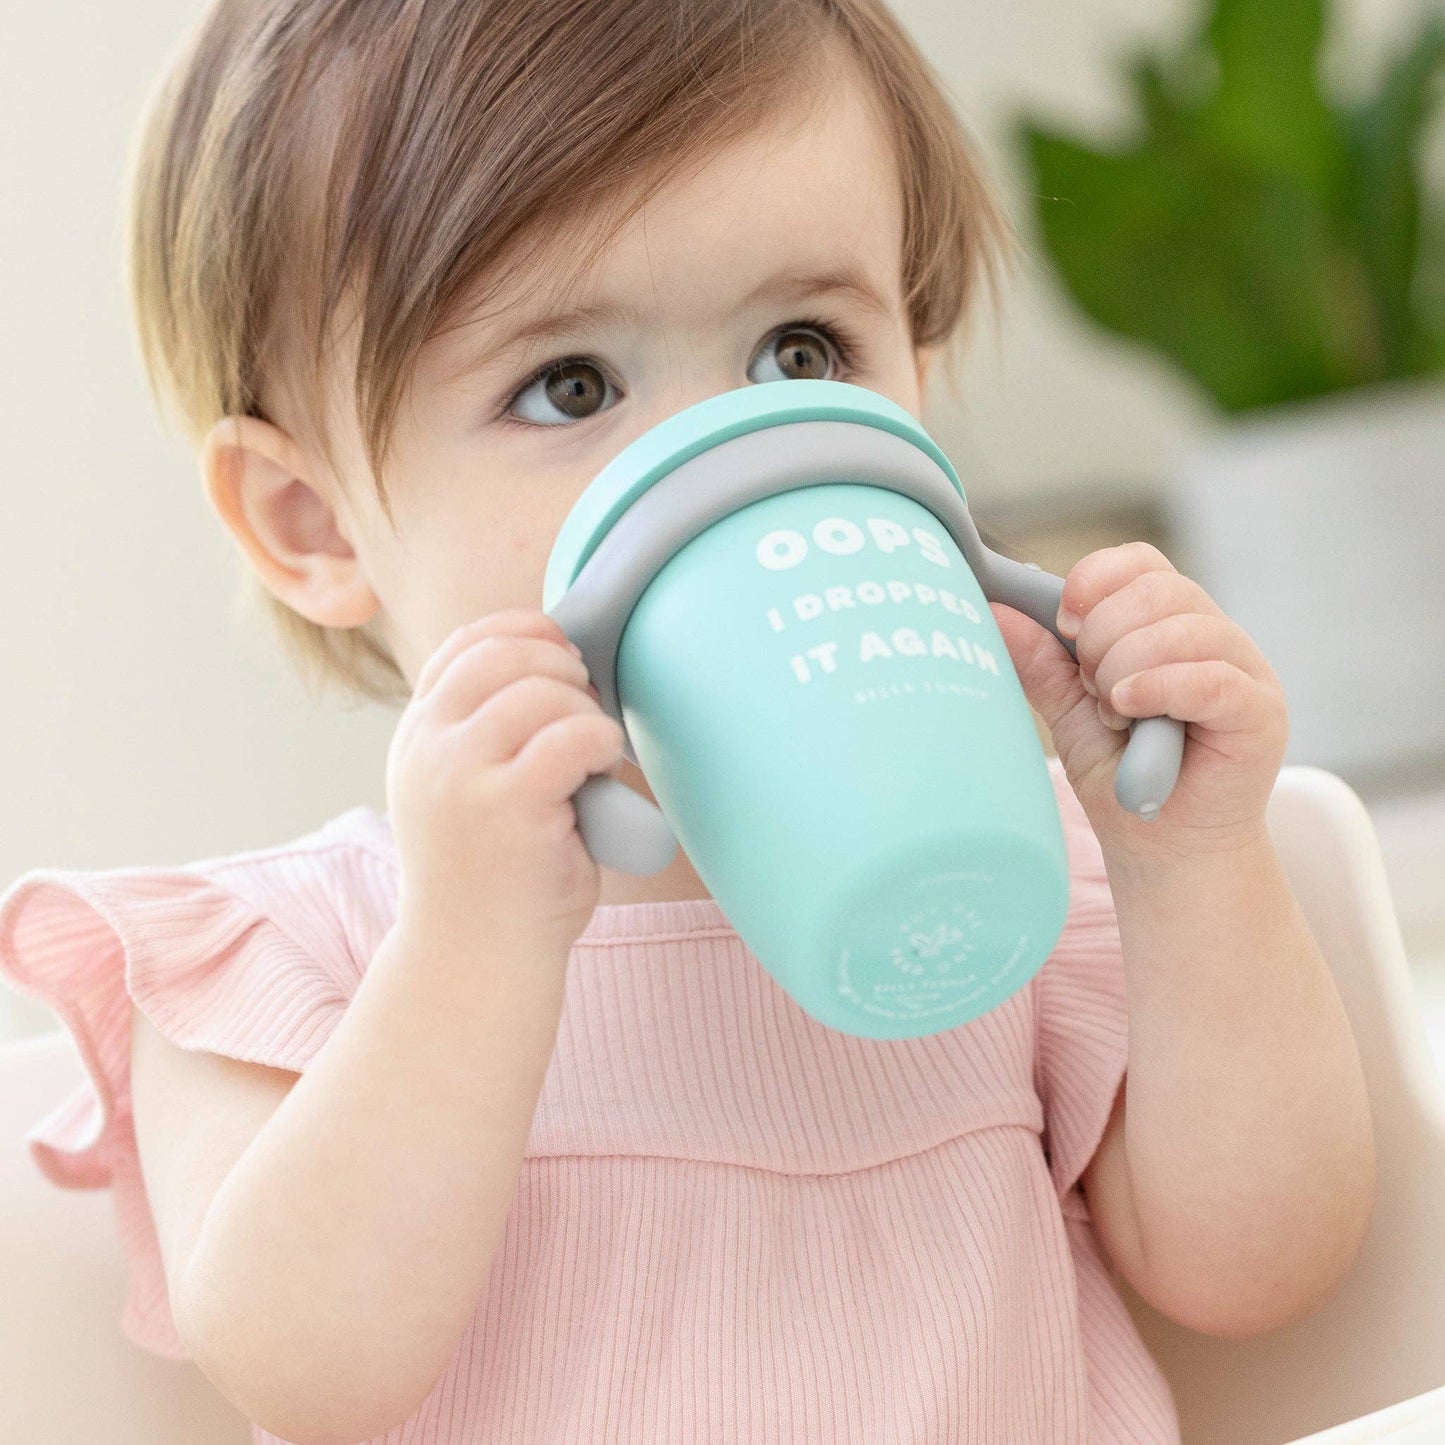 Bella Tunno - Dropped it Again Sippy Cup: Blue